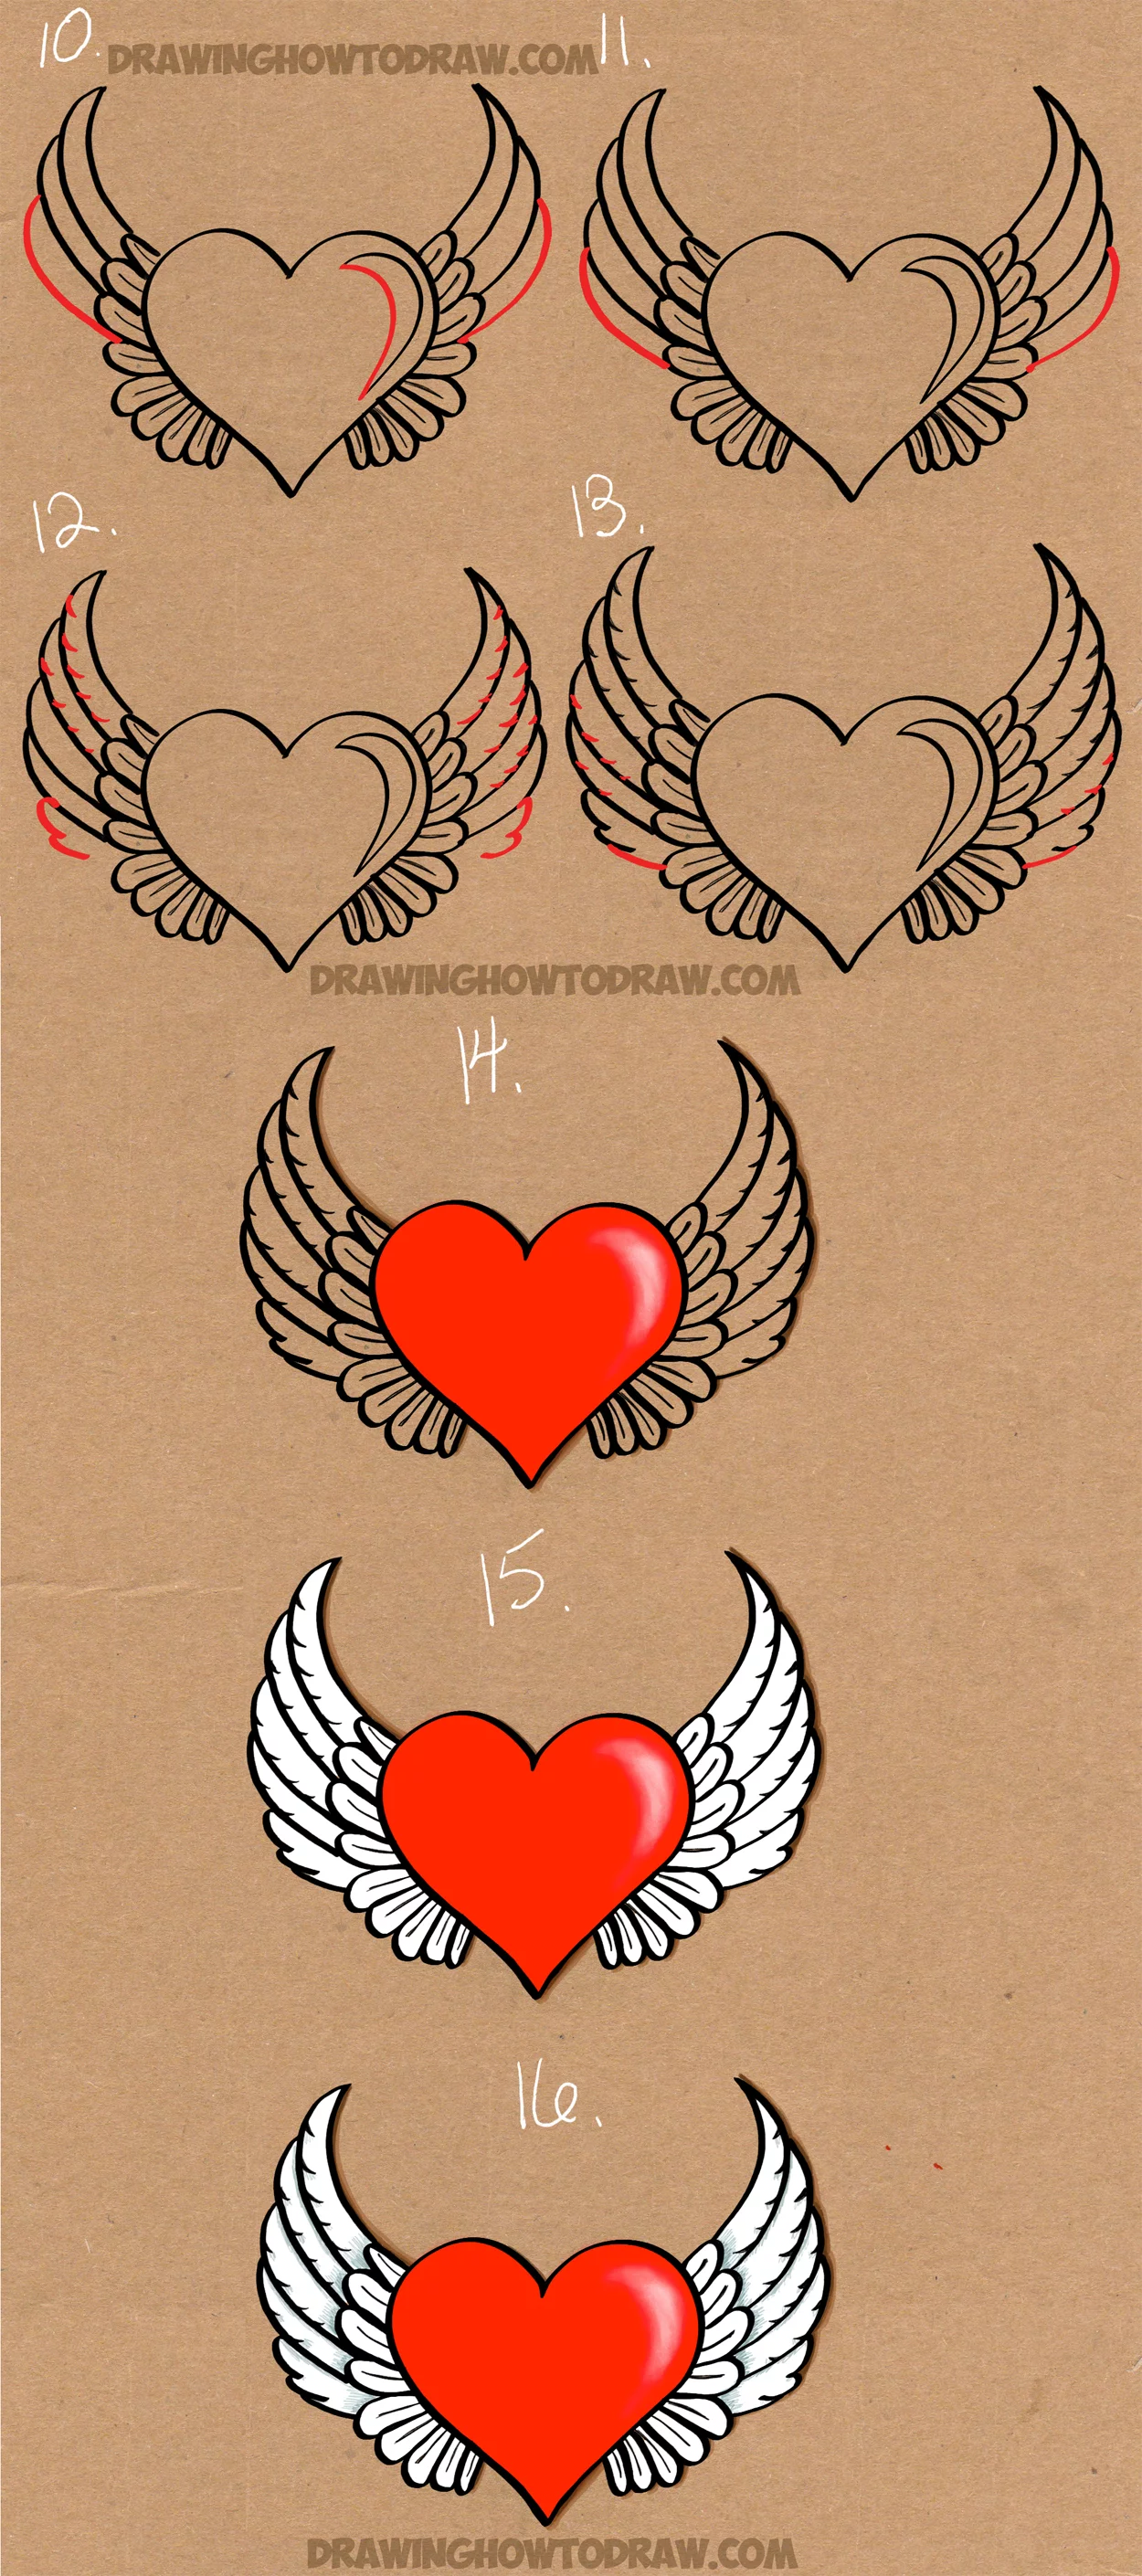 cute drawings of hearts with wings